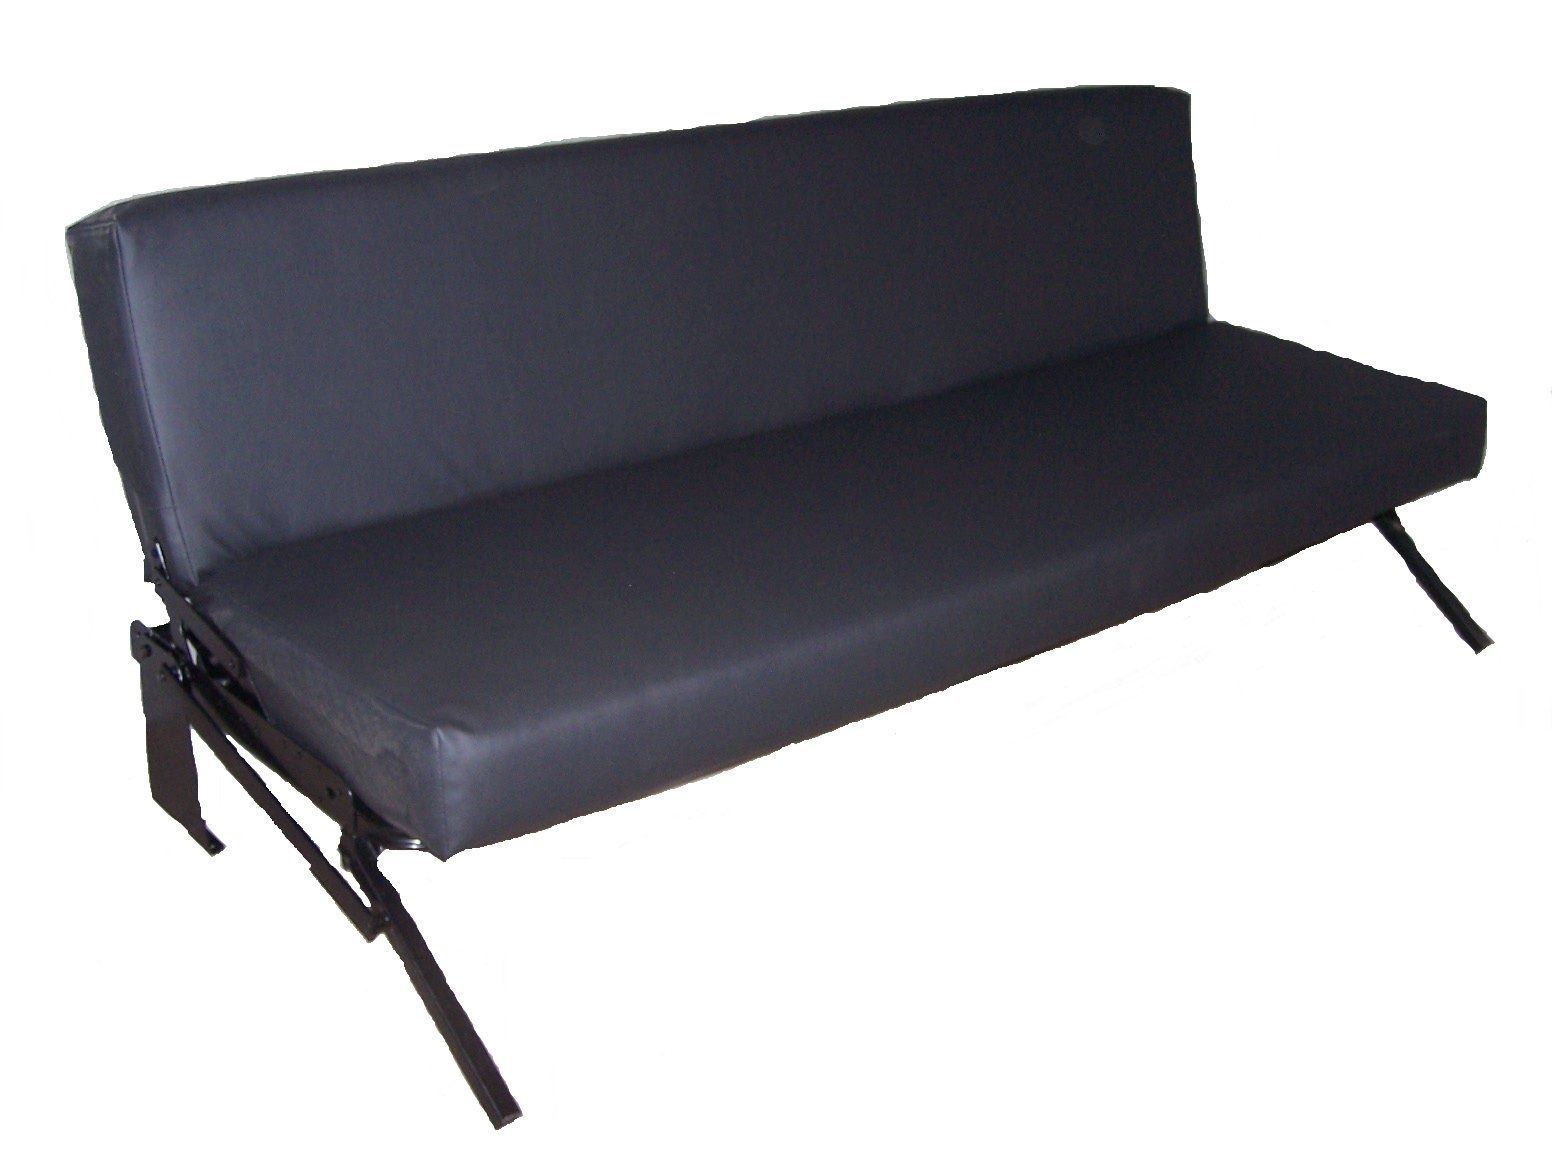 Widely Used Fold Up Sofa Chairs In Cool Folding Couch , Epic Folding Couch 48 In Contemporary Sofa (View 15 of 15)